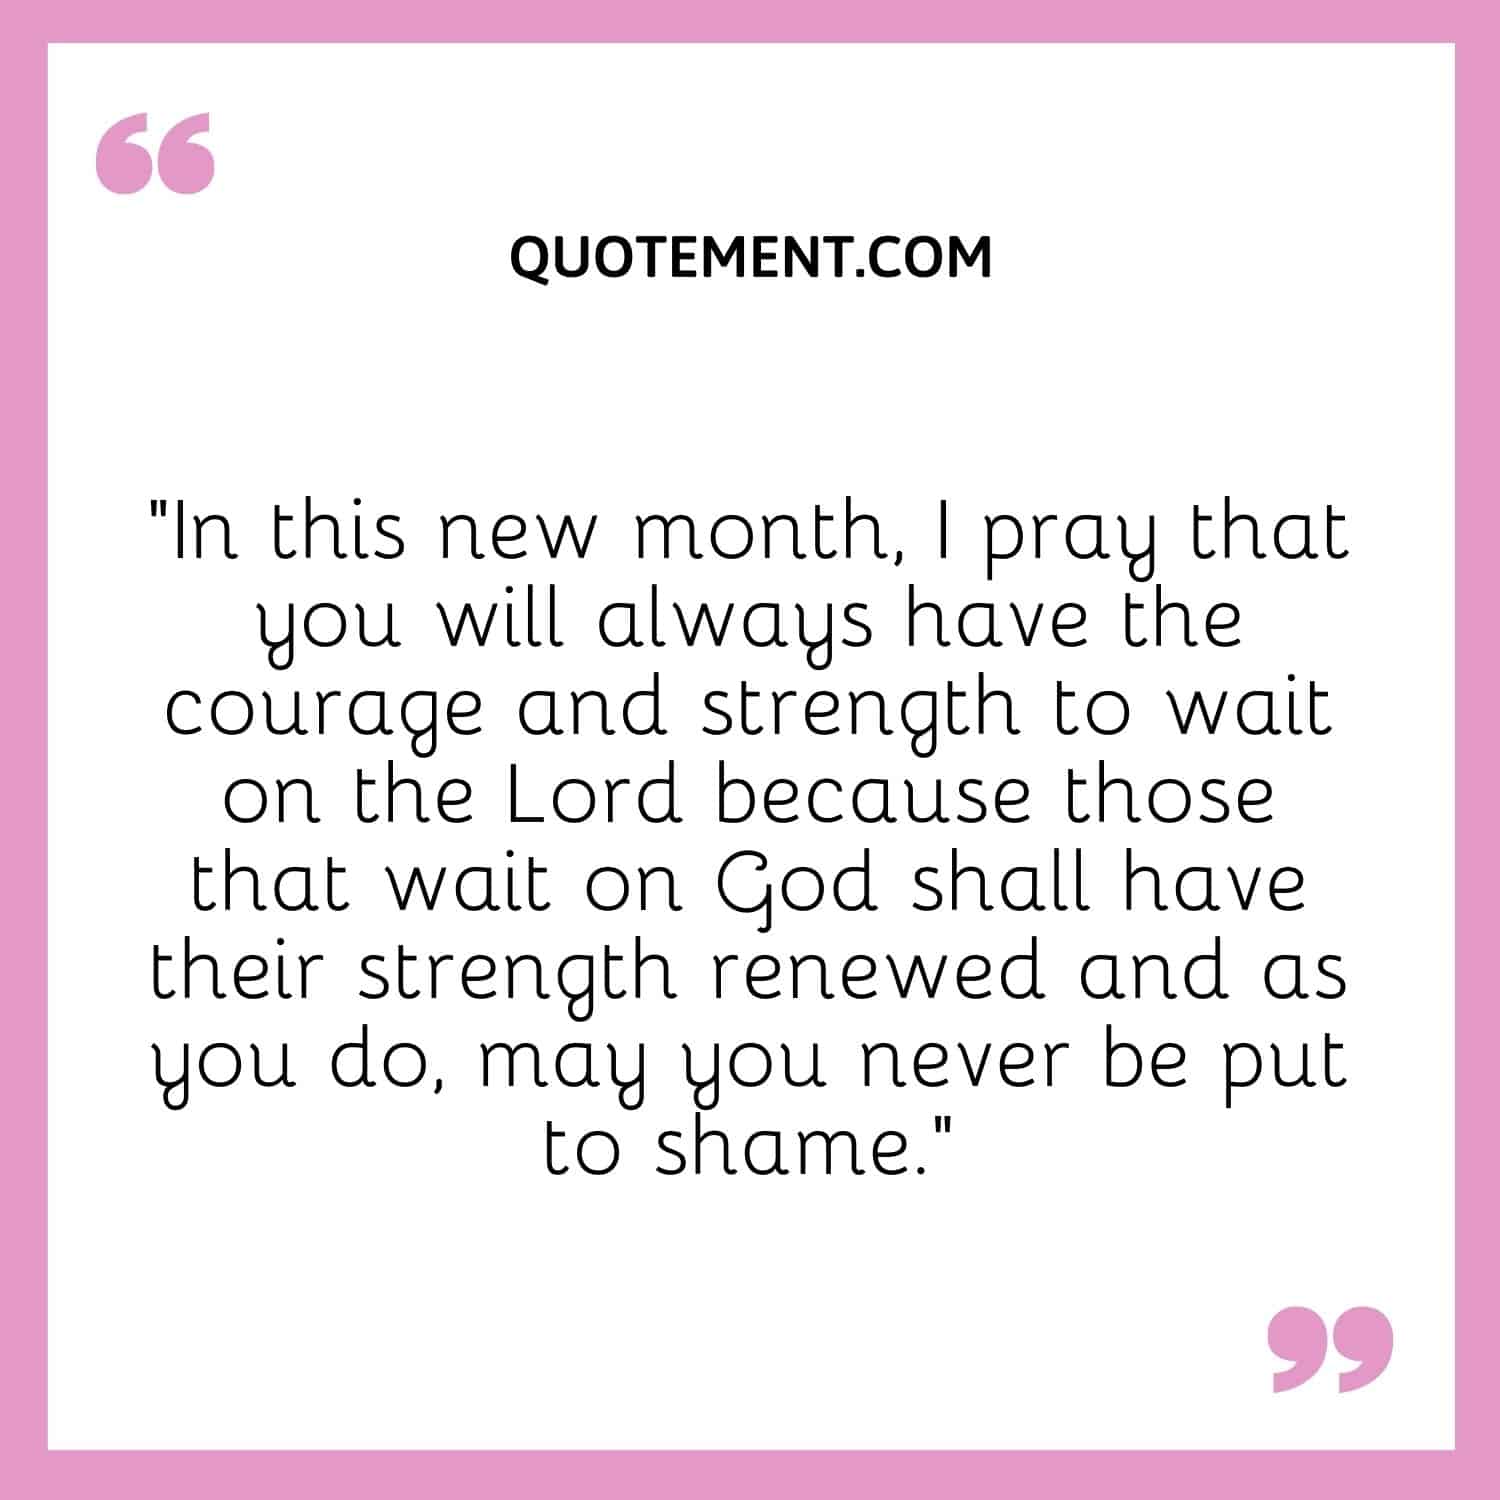 I pray that you will always have the courage and strength to wait on the Lord